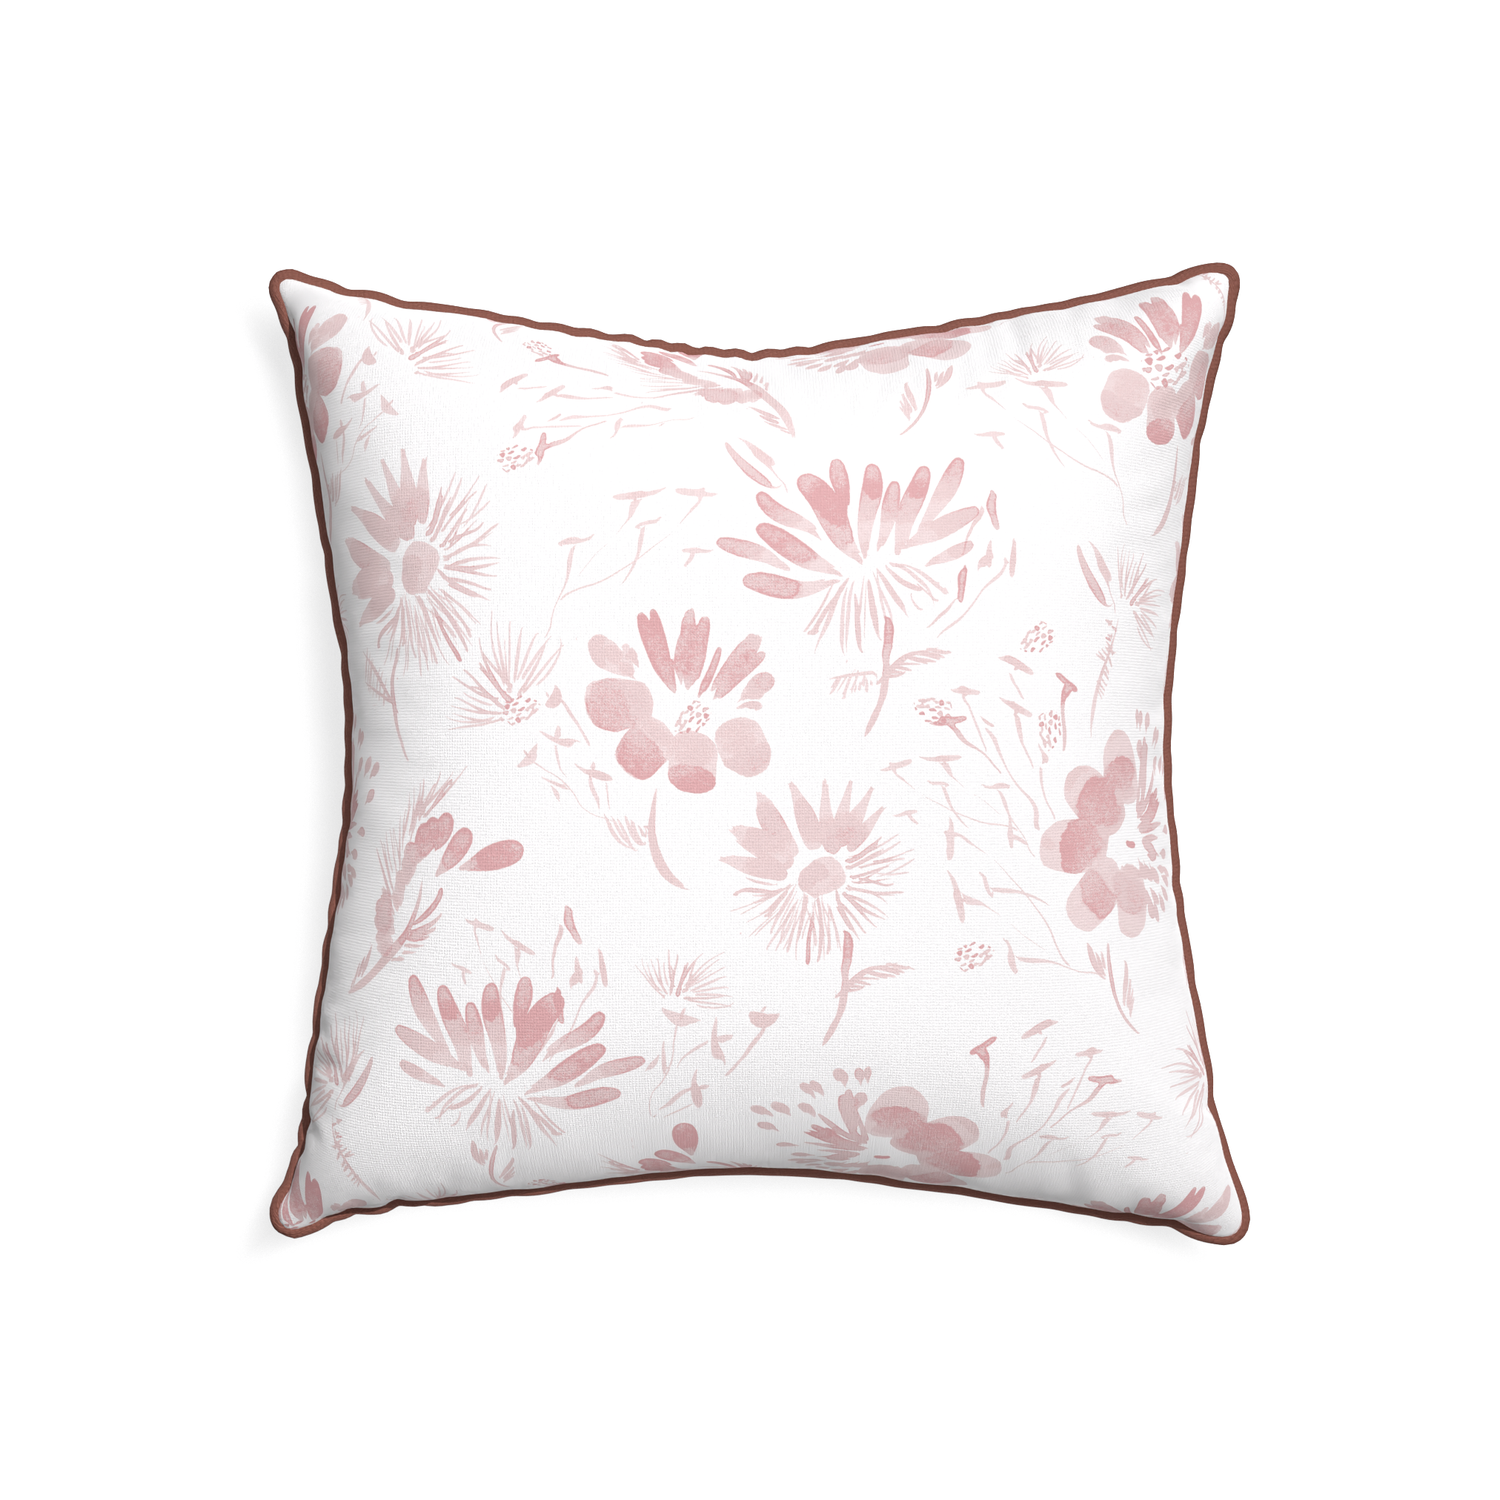 22-square blake custom pink floralpillow with w piping on white background